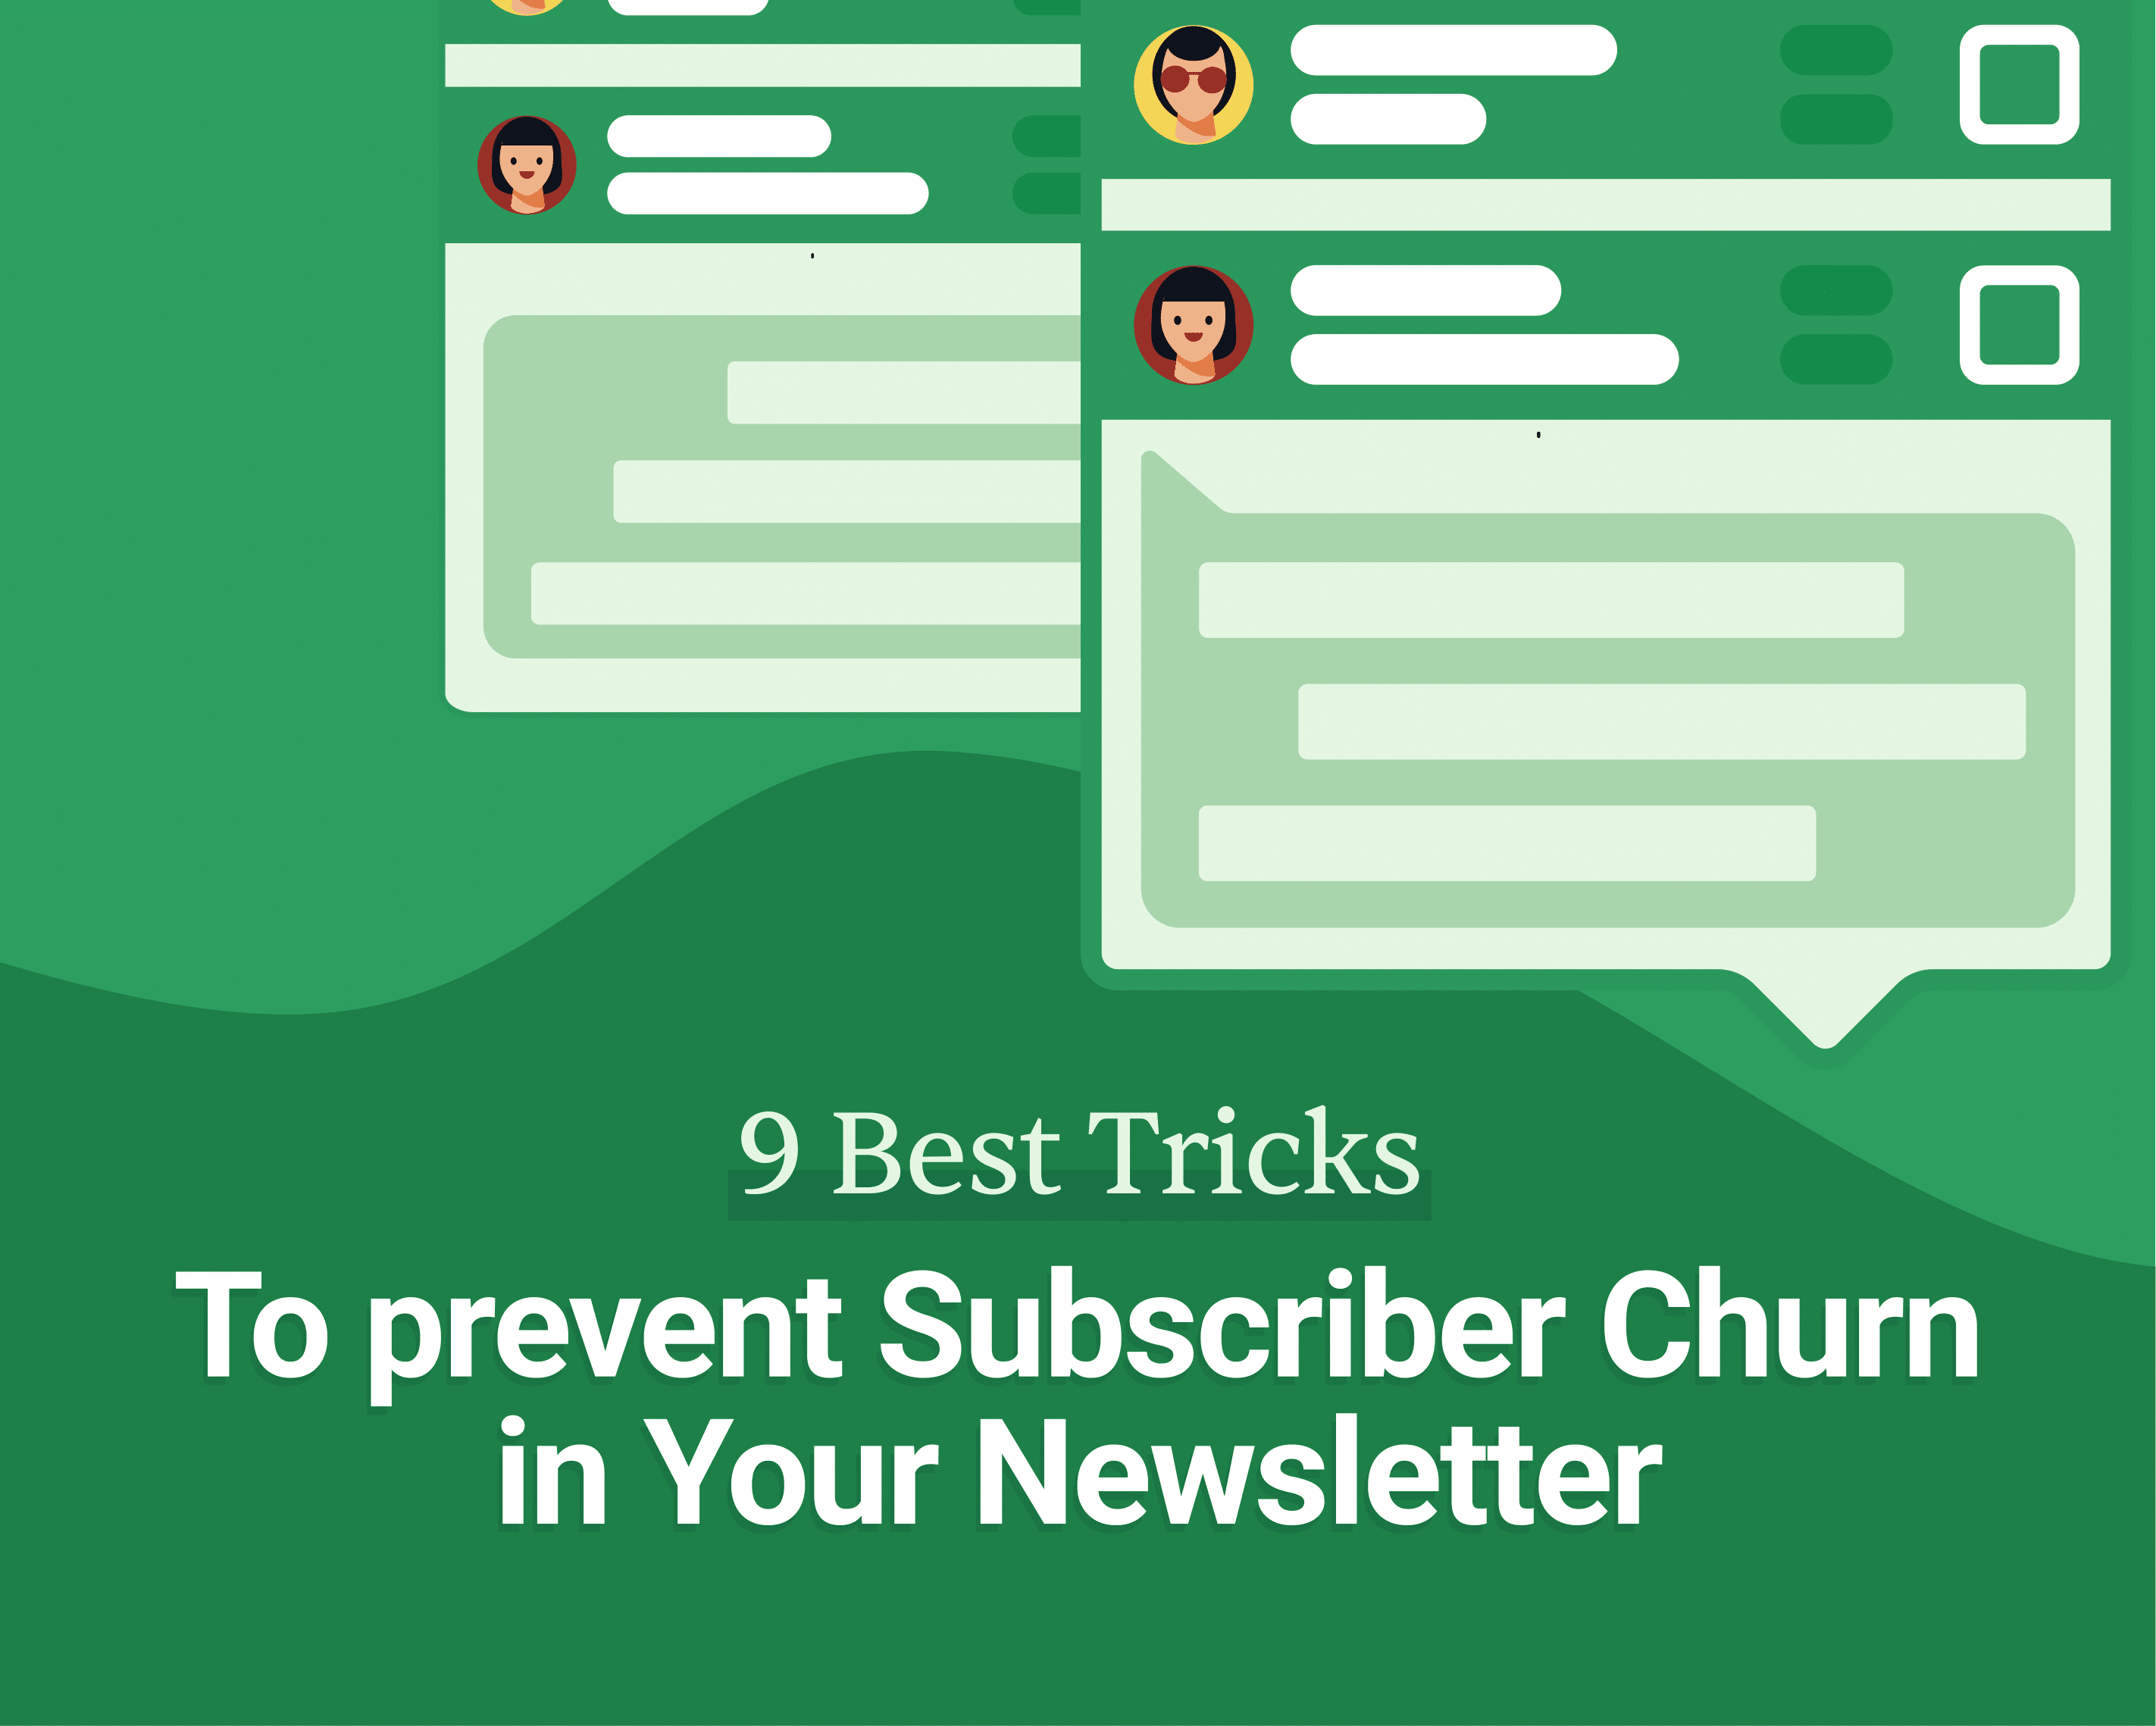 Cover Images for How to Prevent Subscription Churn in Your Newsletter